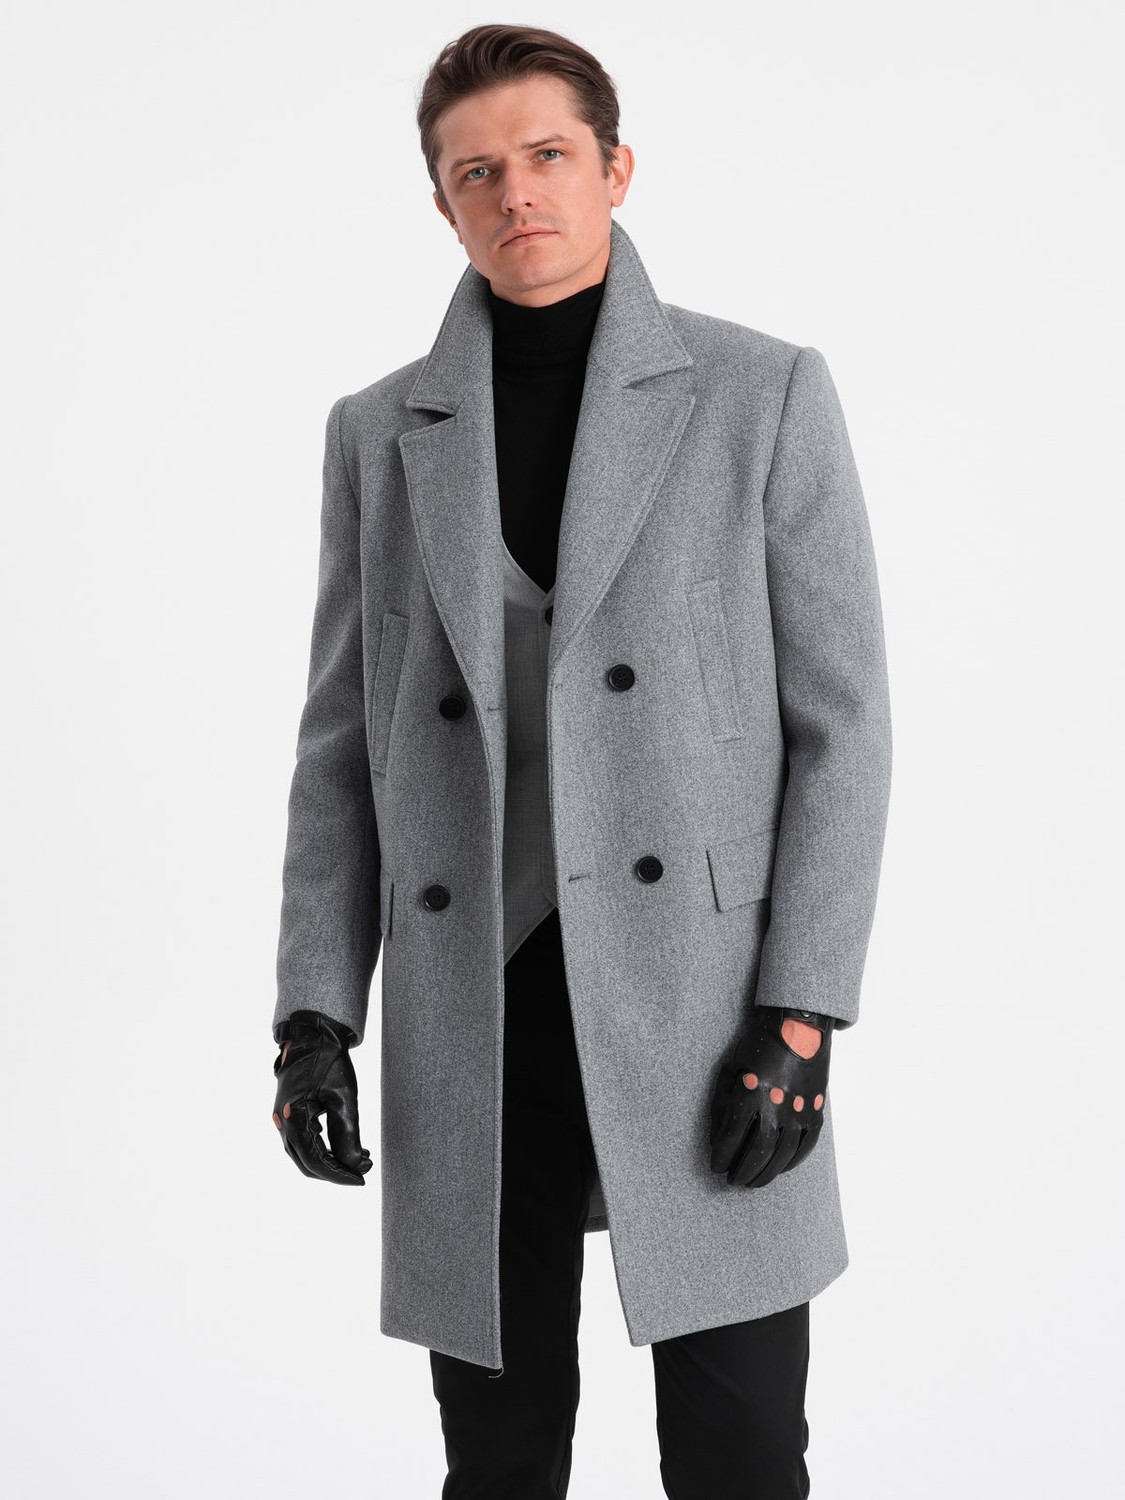 Ombre Men's double-breasted lined coat - grey